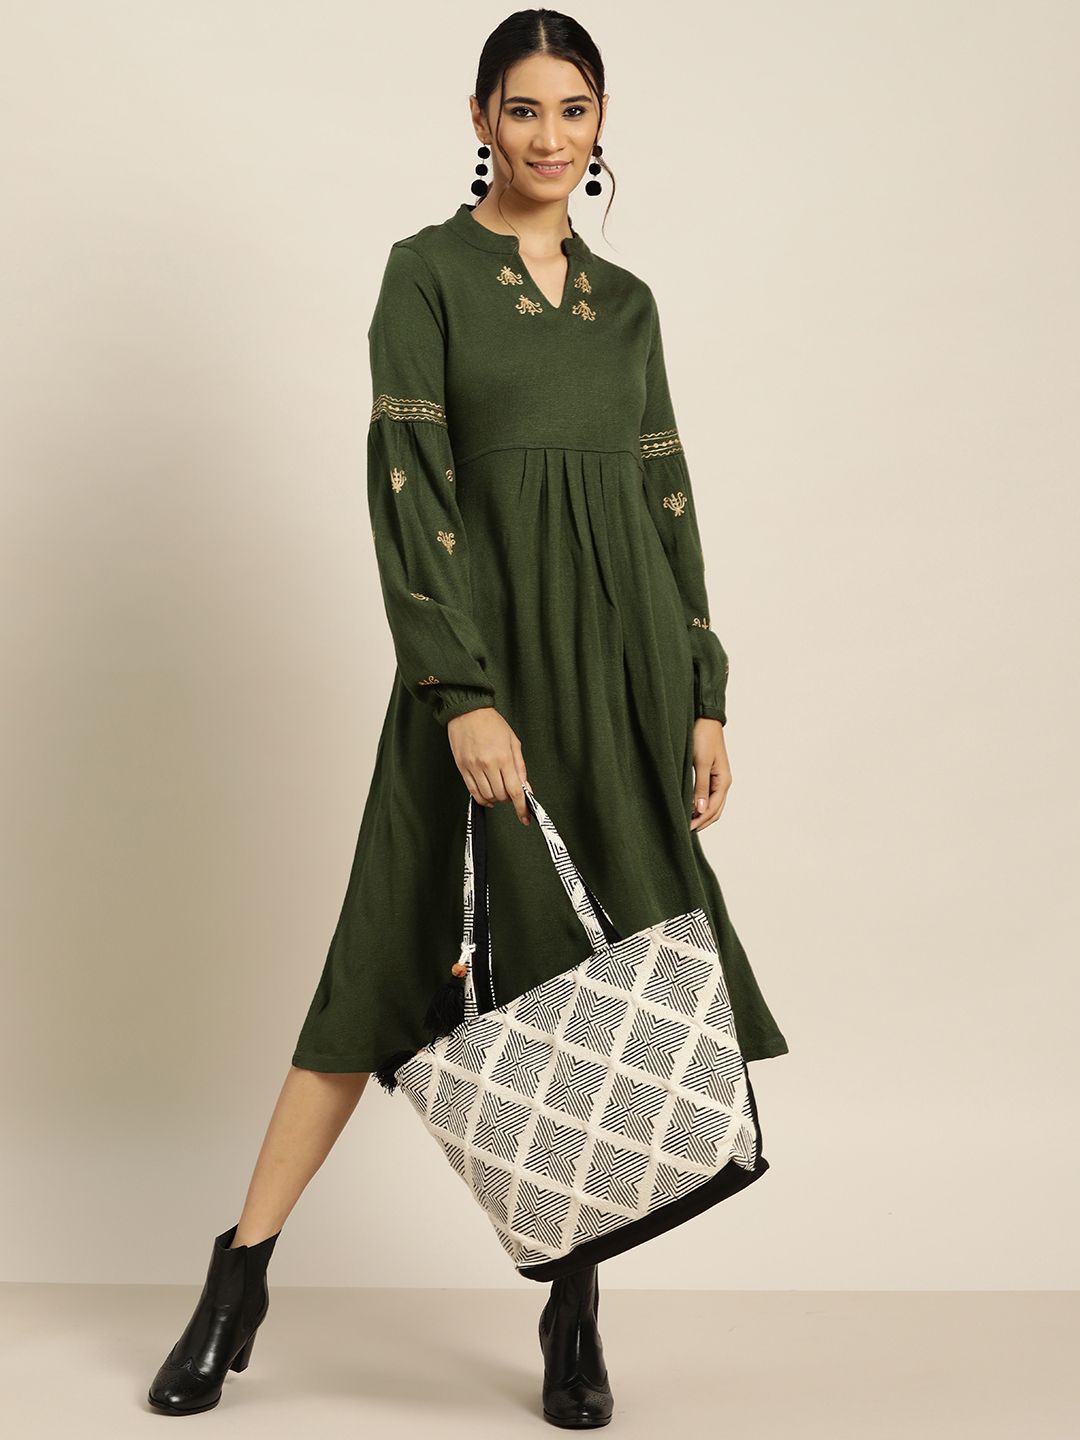 Sangria Olive Green Embroidered Mandarin Collar Winter A-Line Dress Price in India